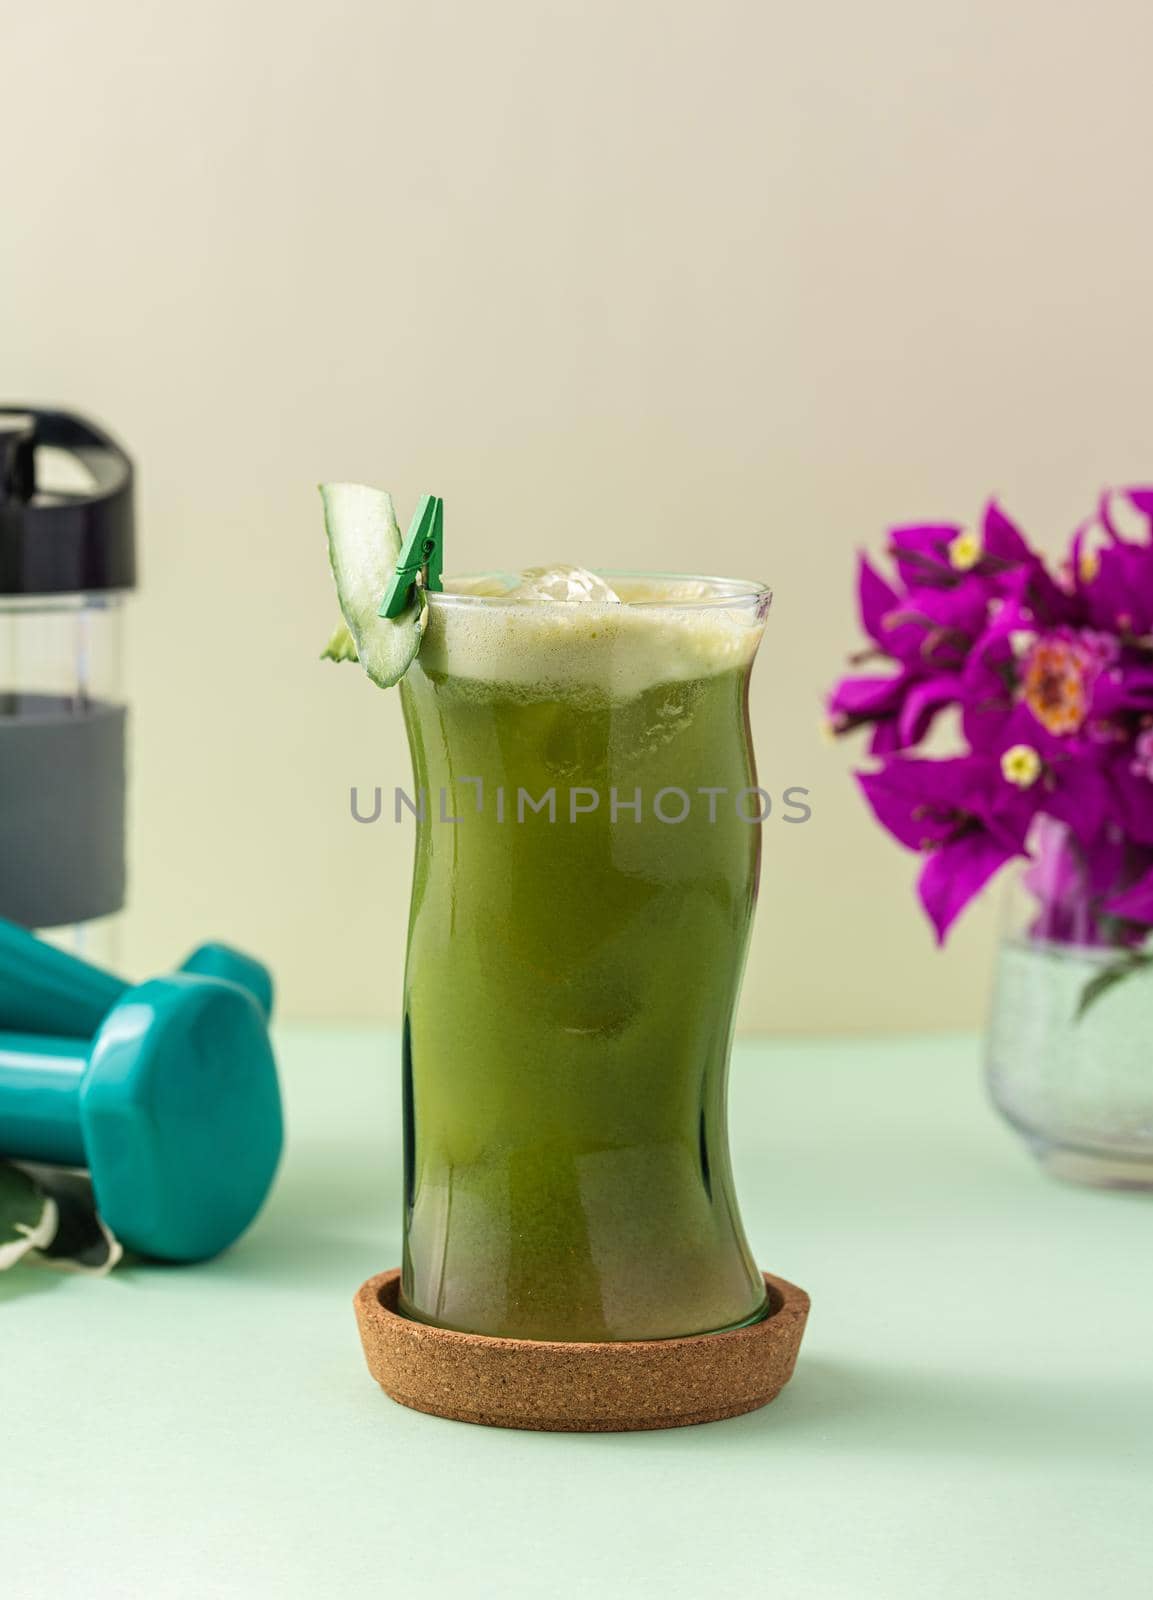 Vegetable smoothie, healthy organic juice made from celery, green apples, leaves of spinach and young carrot. Glass of green juice. by Sonat